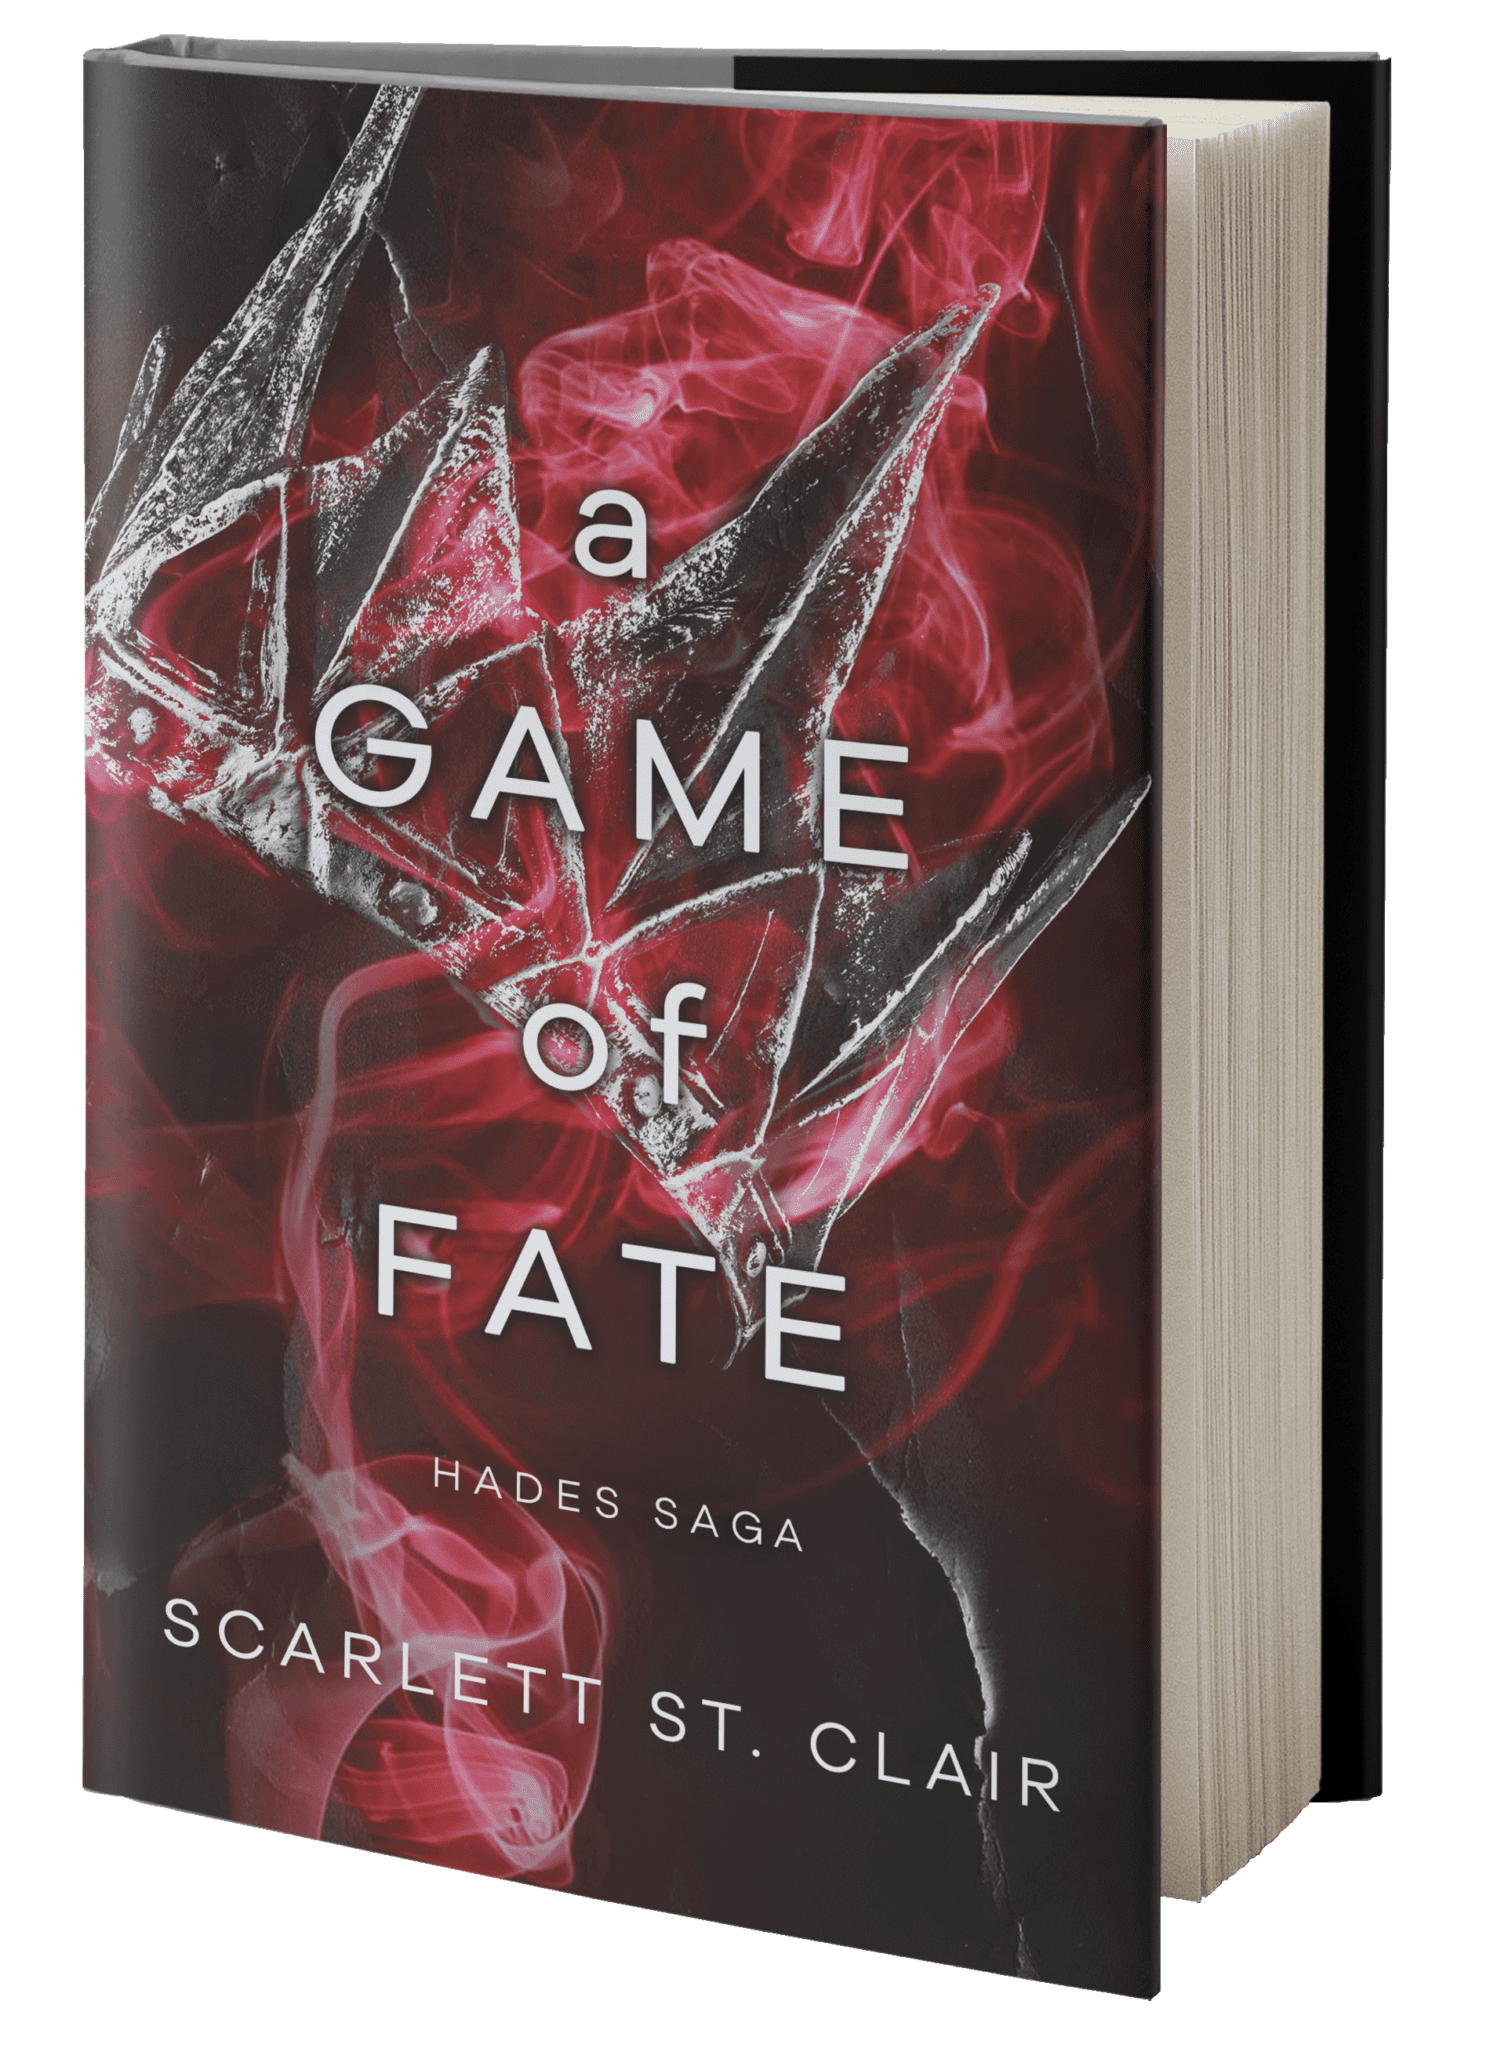 Book cover of "A Game of Fate"